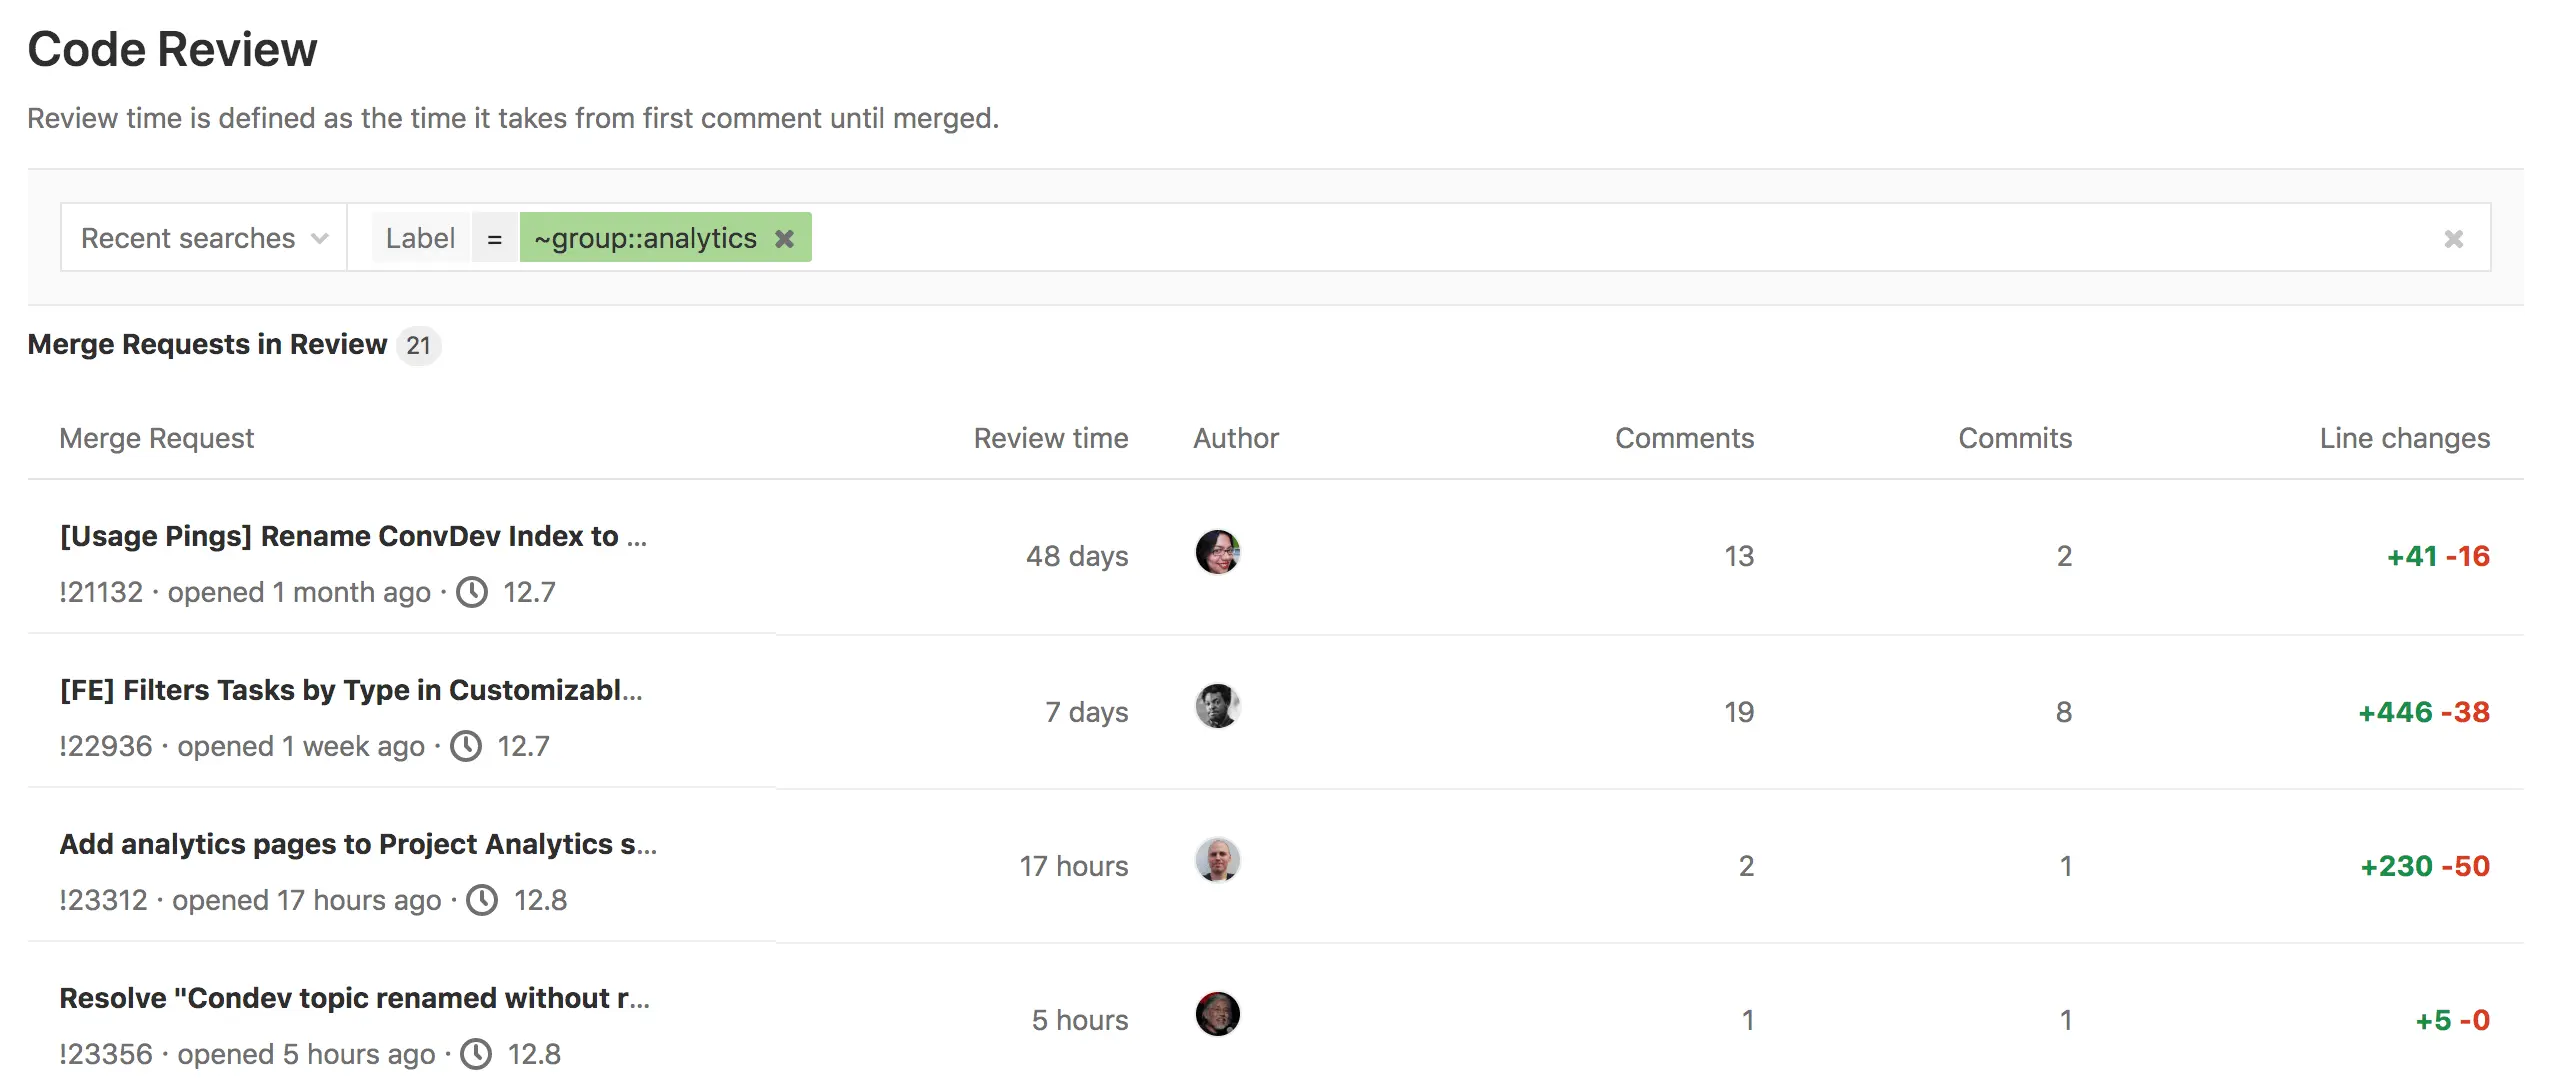 Troubleshoot delays with our Code Review Analytics tool